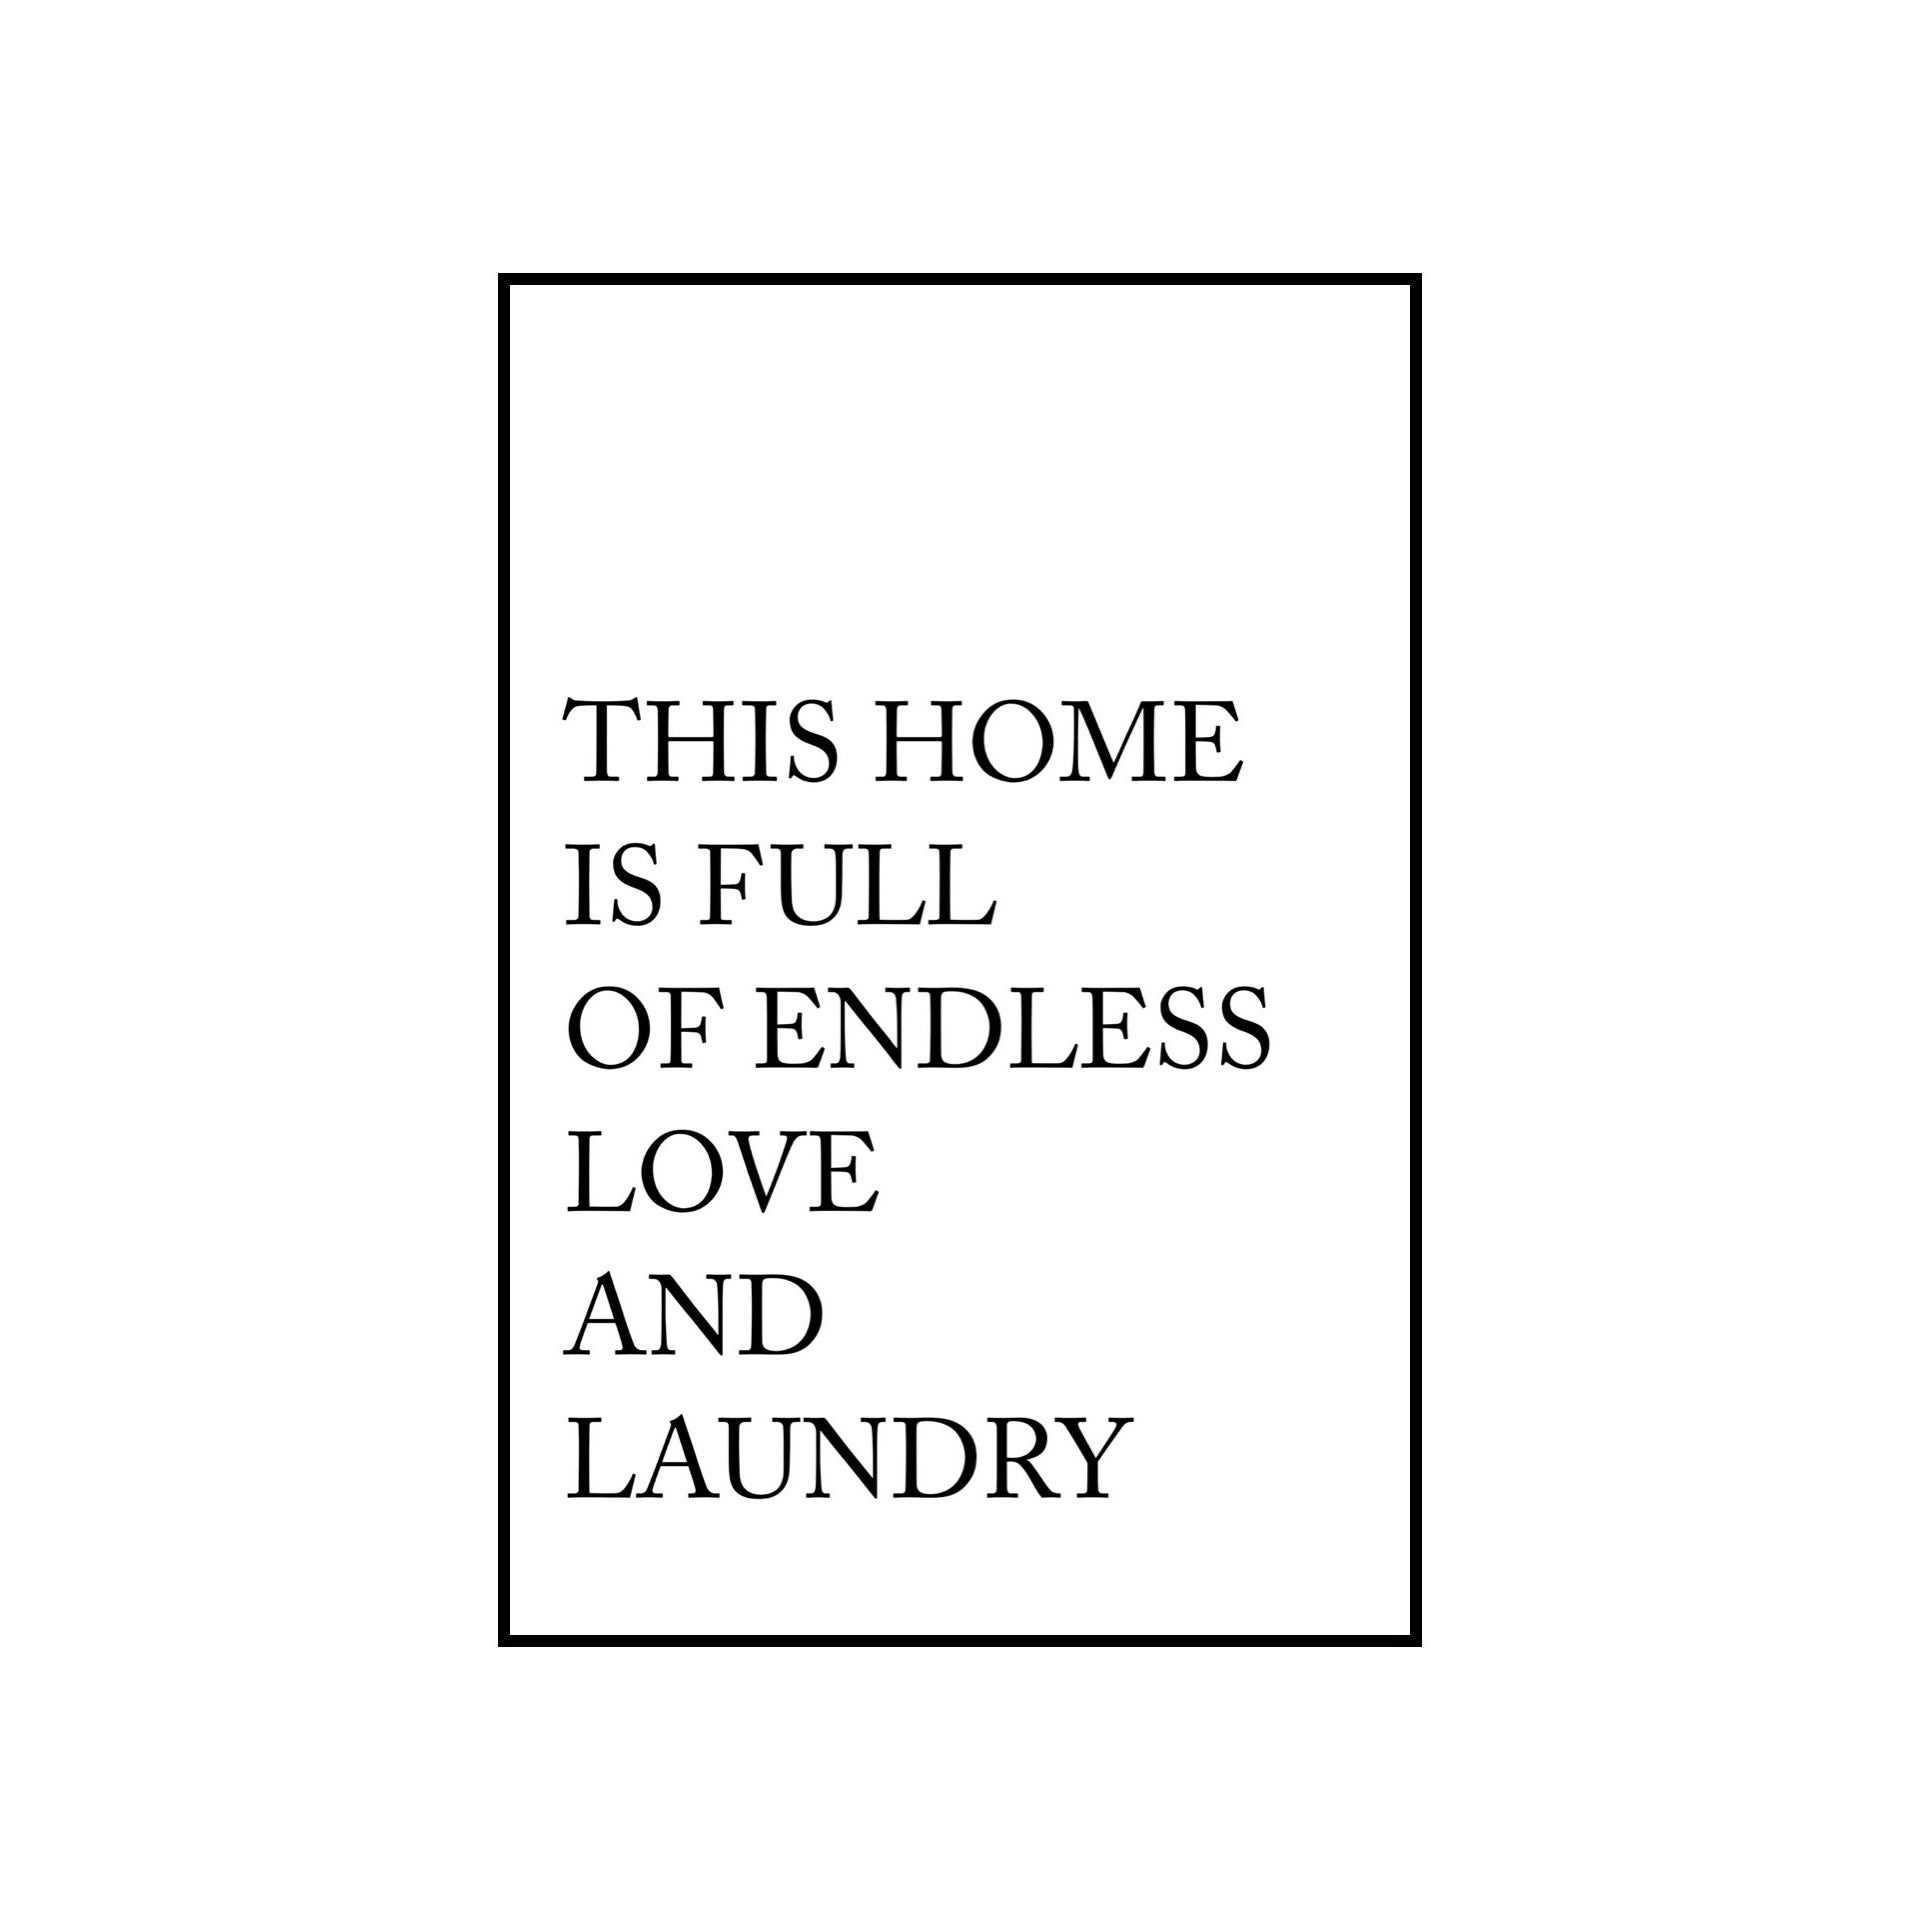 This home is full of love and laundry - THE WALL STYLIST